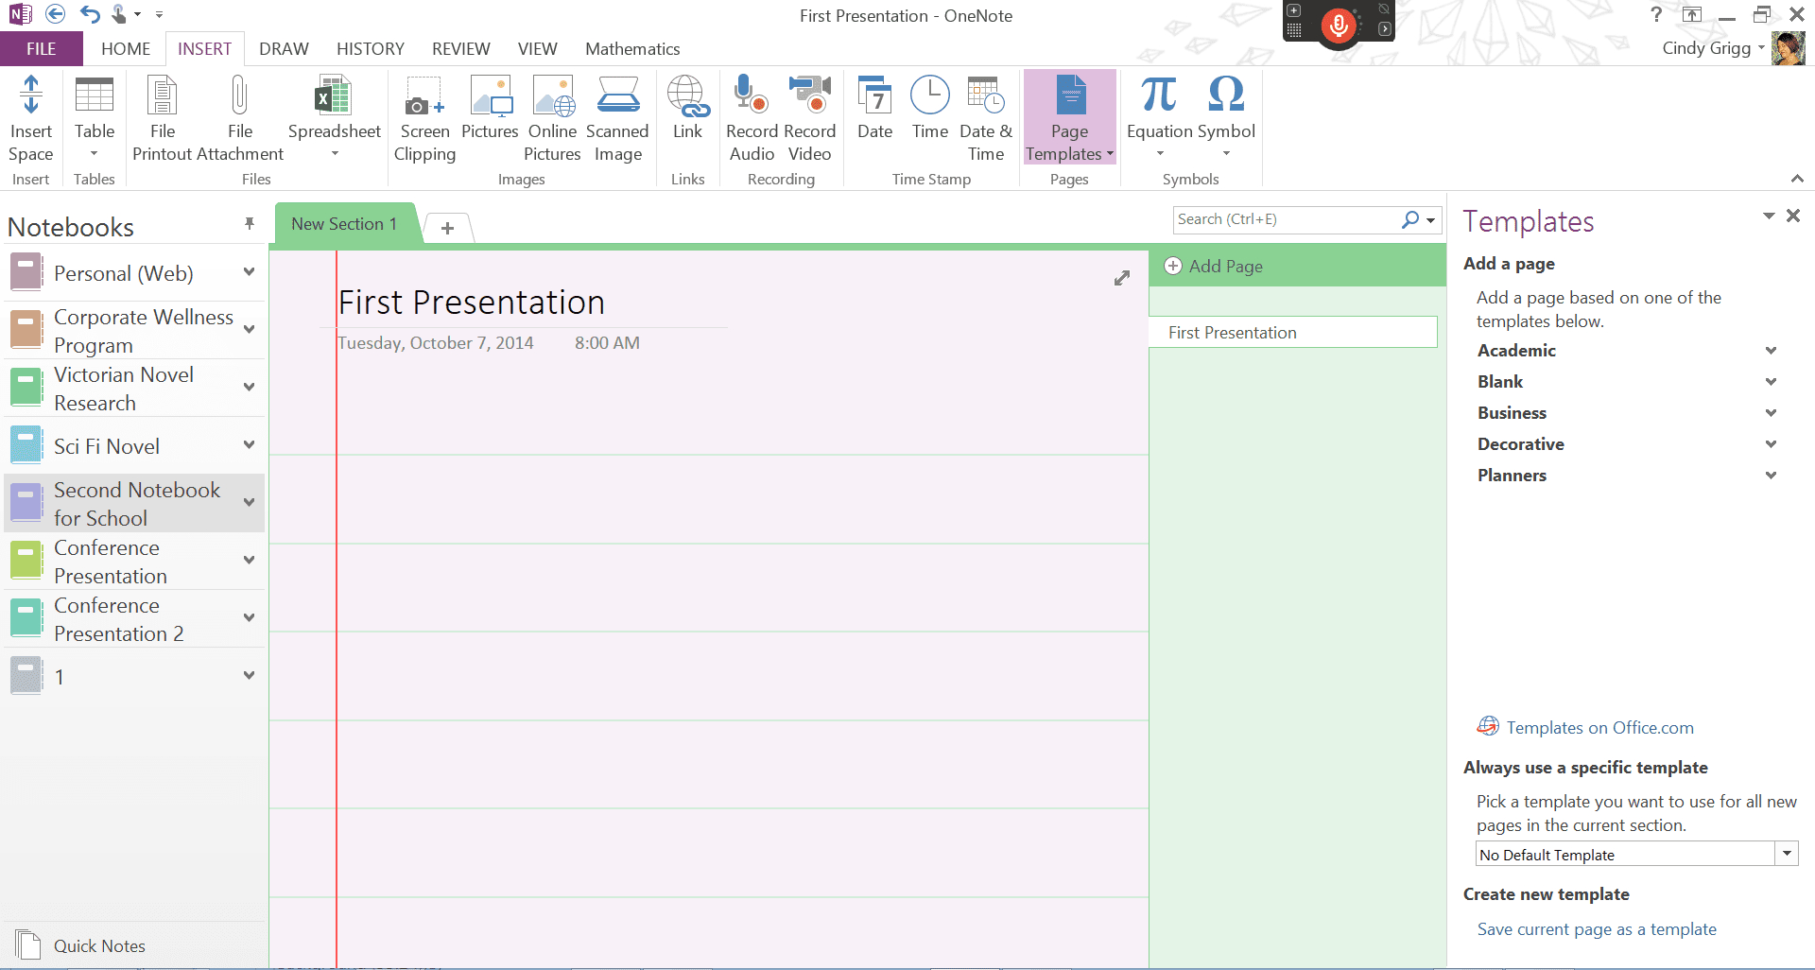 project-management-templates-for-onenote-example-of-spreadshee-project-management-templates-for